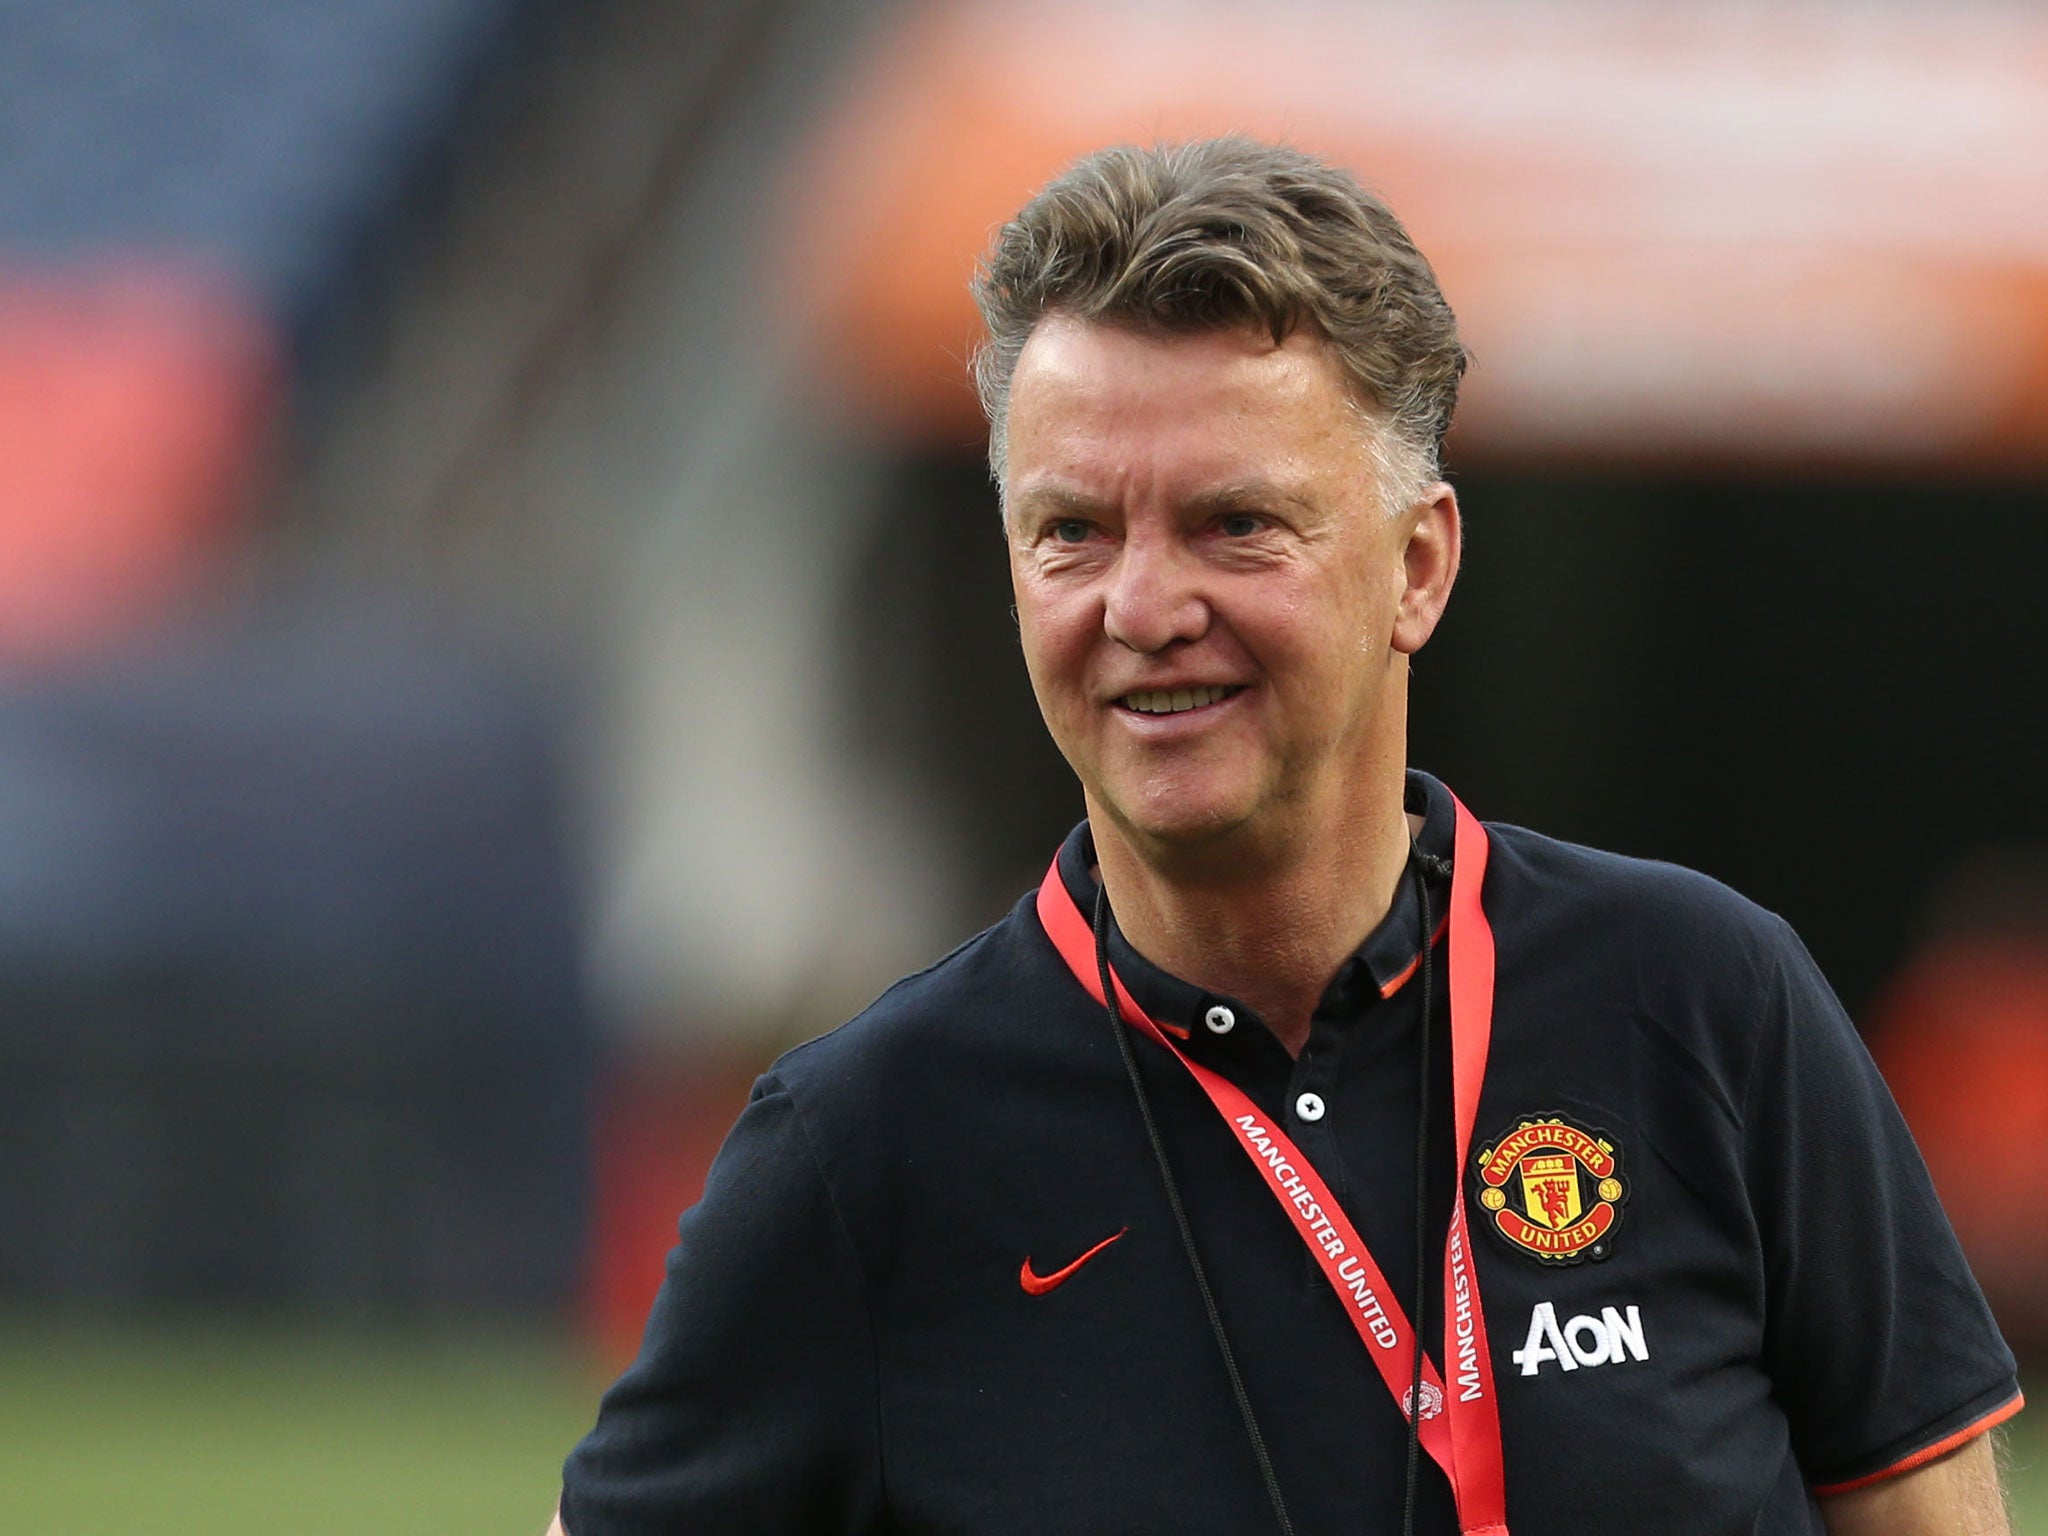 Speaking his mind: Louise Van Gaal made his feelings clear about the tour